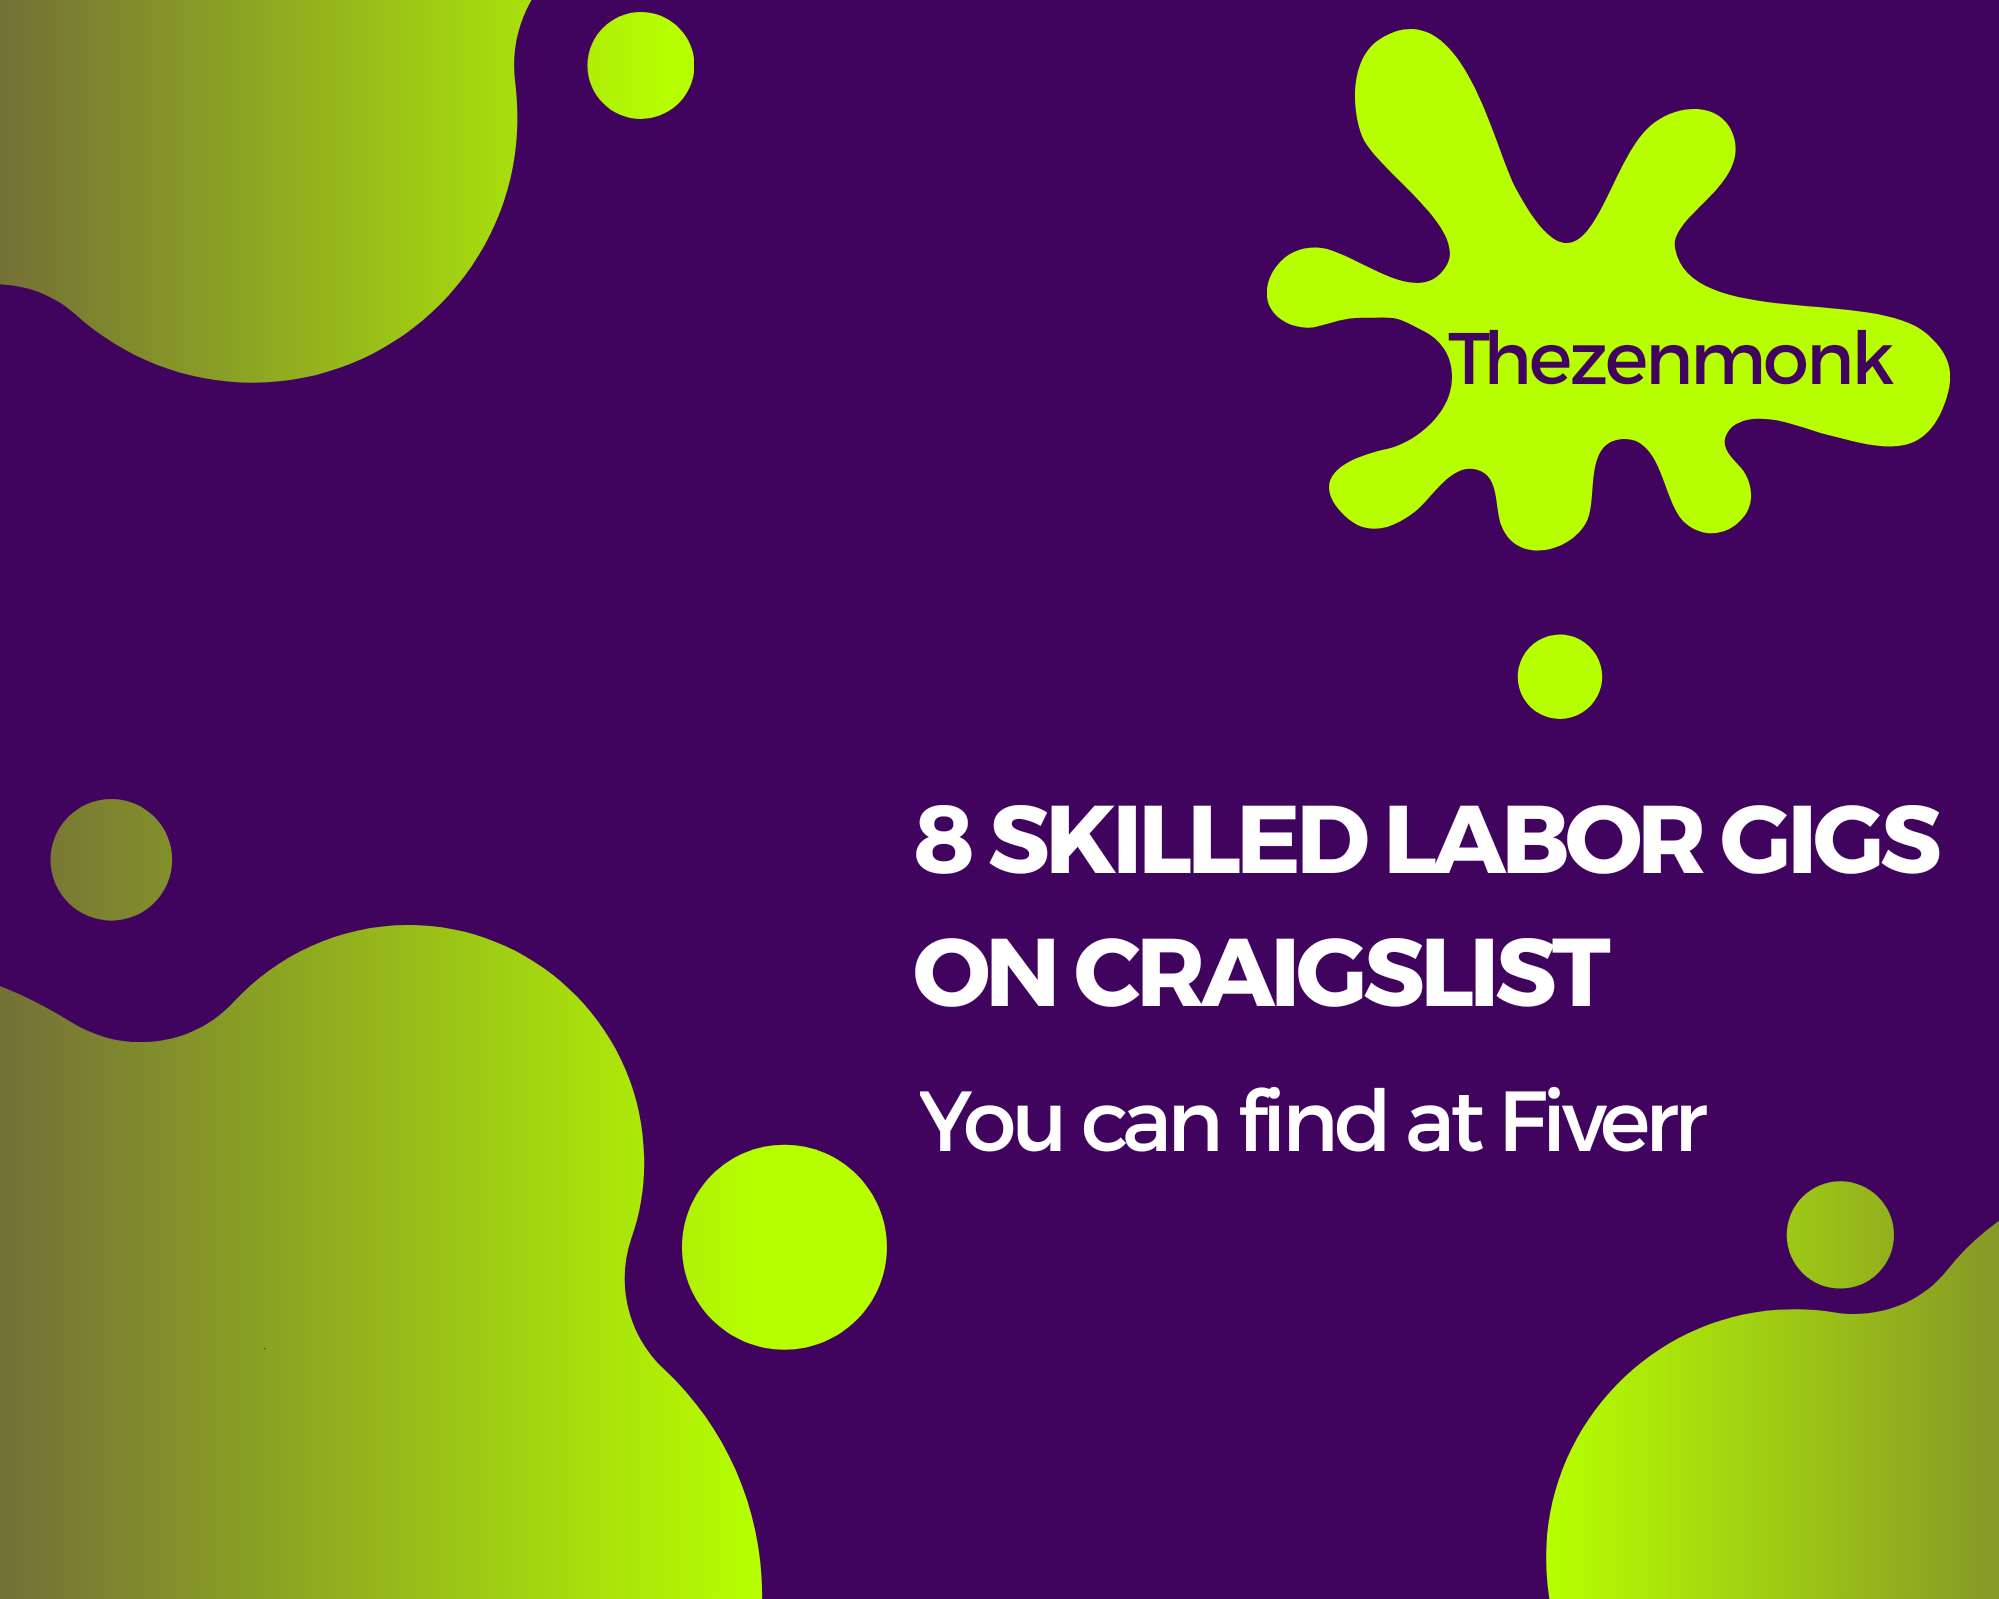 8 Skilled Labor Gigs On Craigslist You Can Find at Fiverr ...